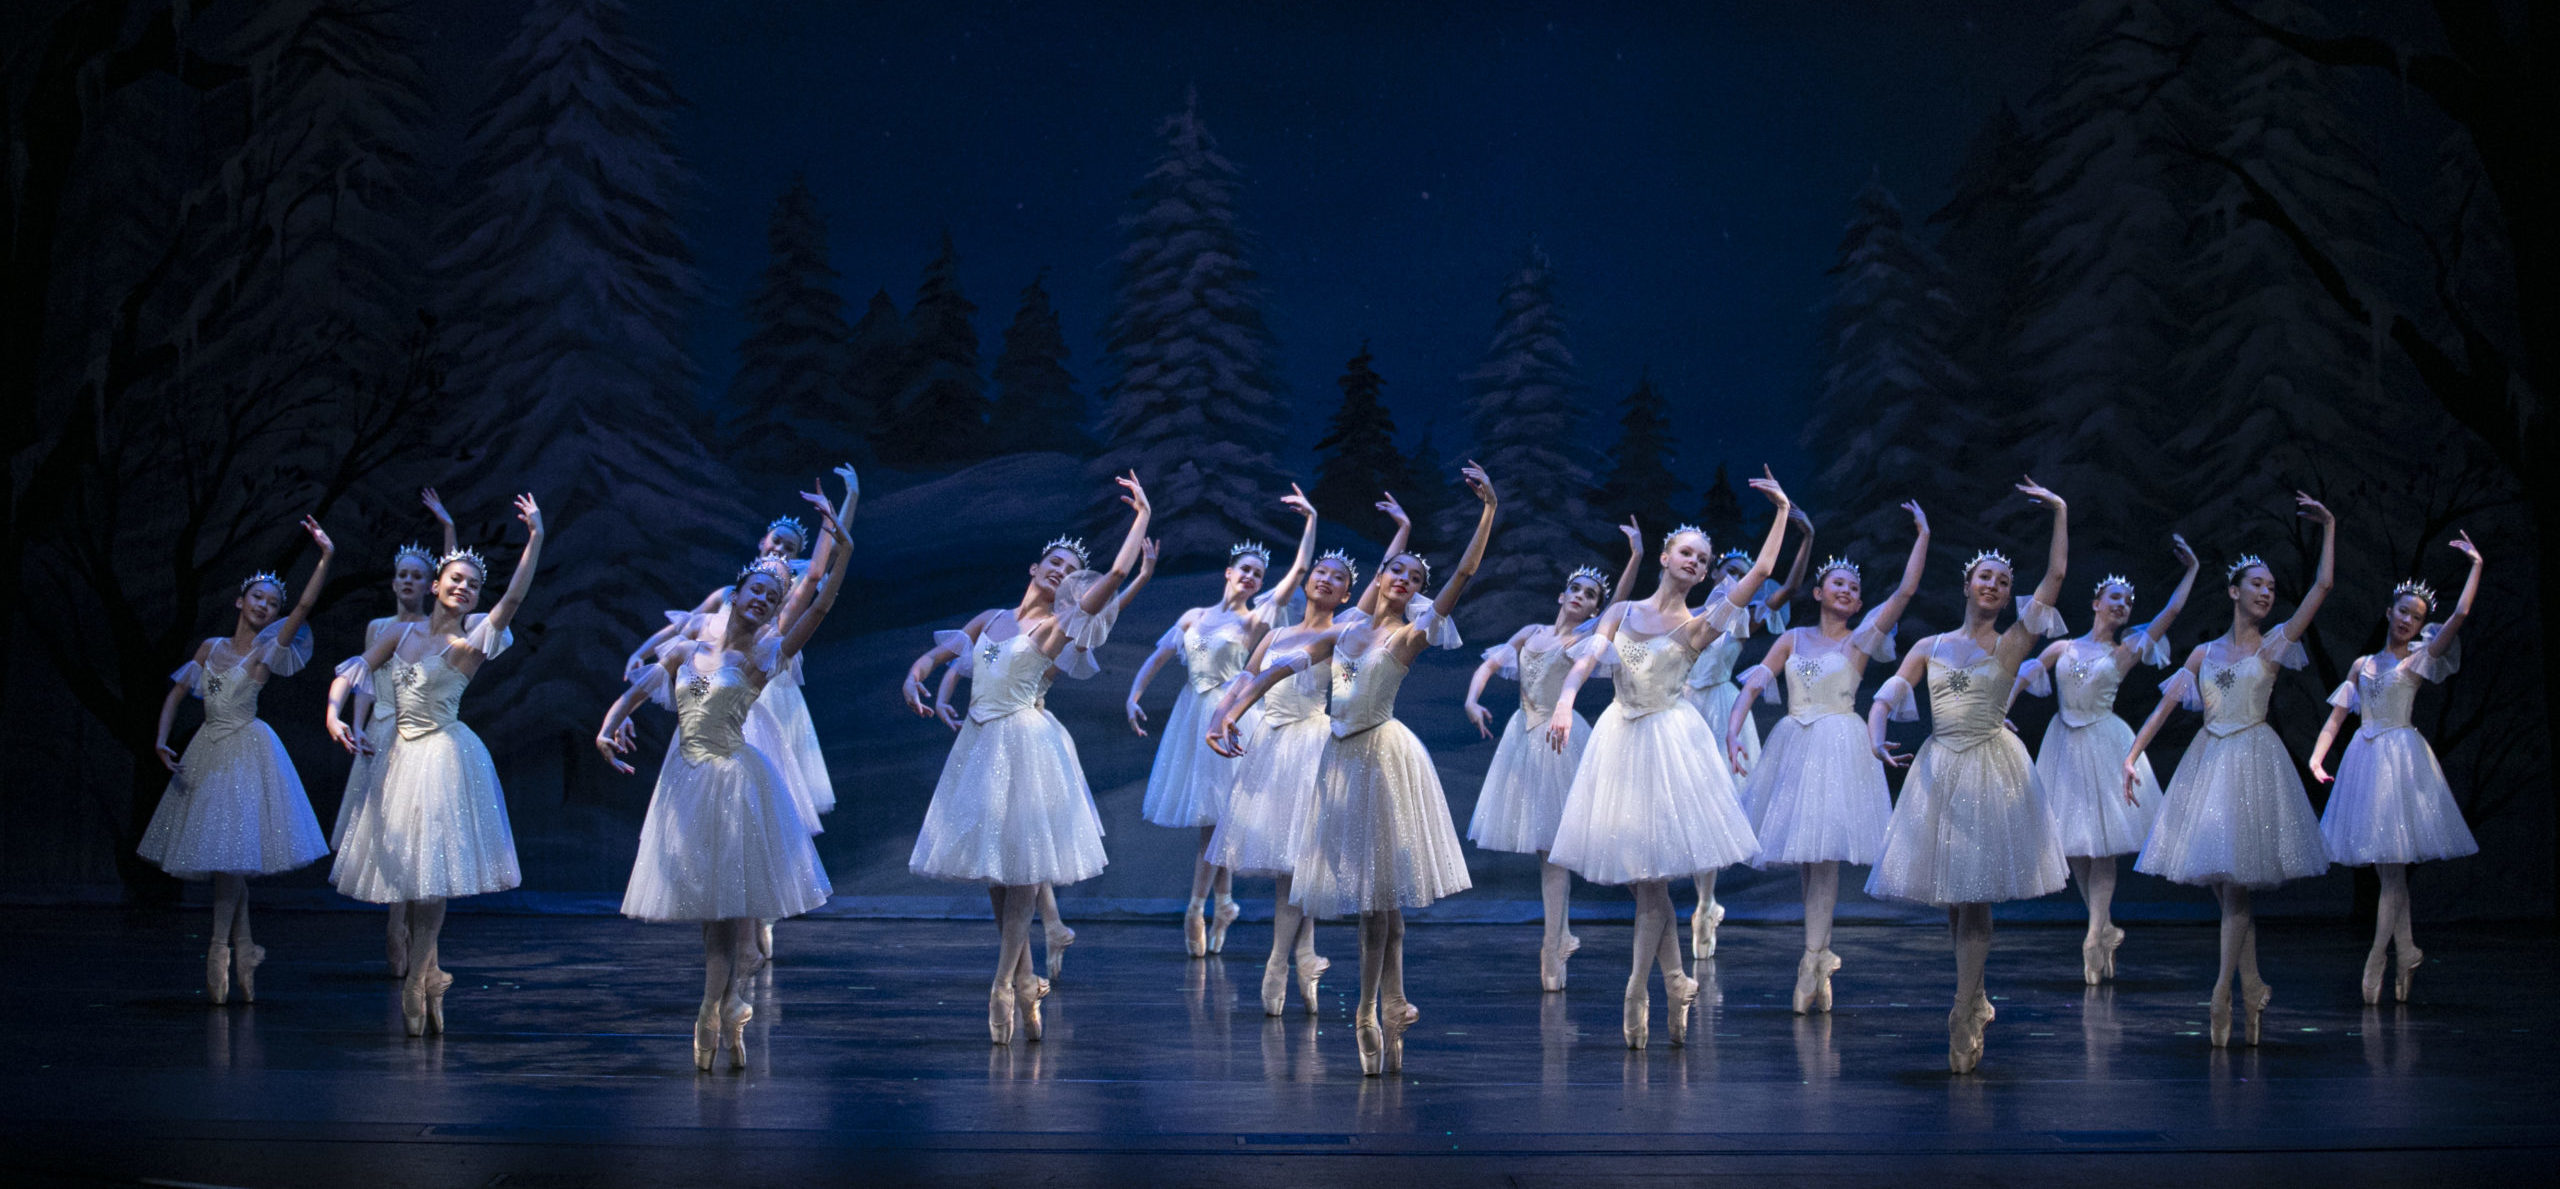 A group of ballerinas on stage all dressed in white